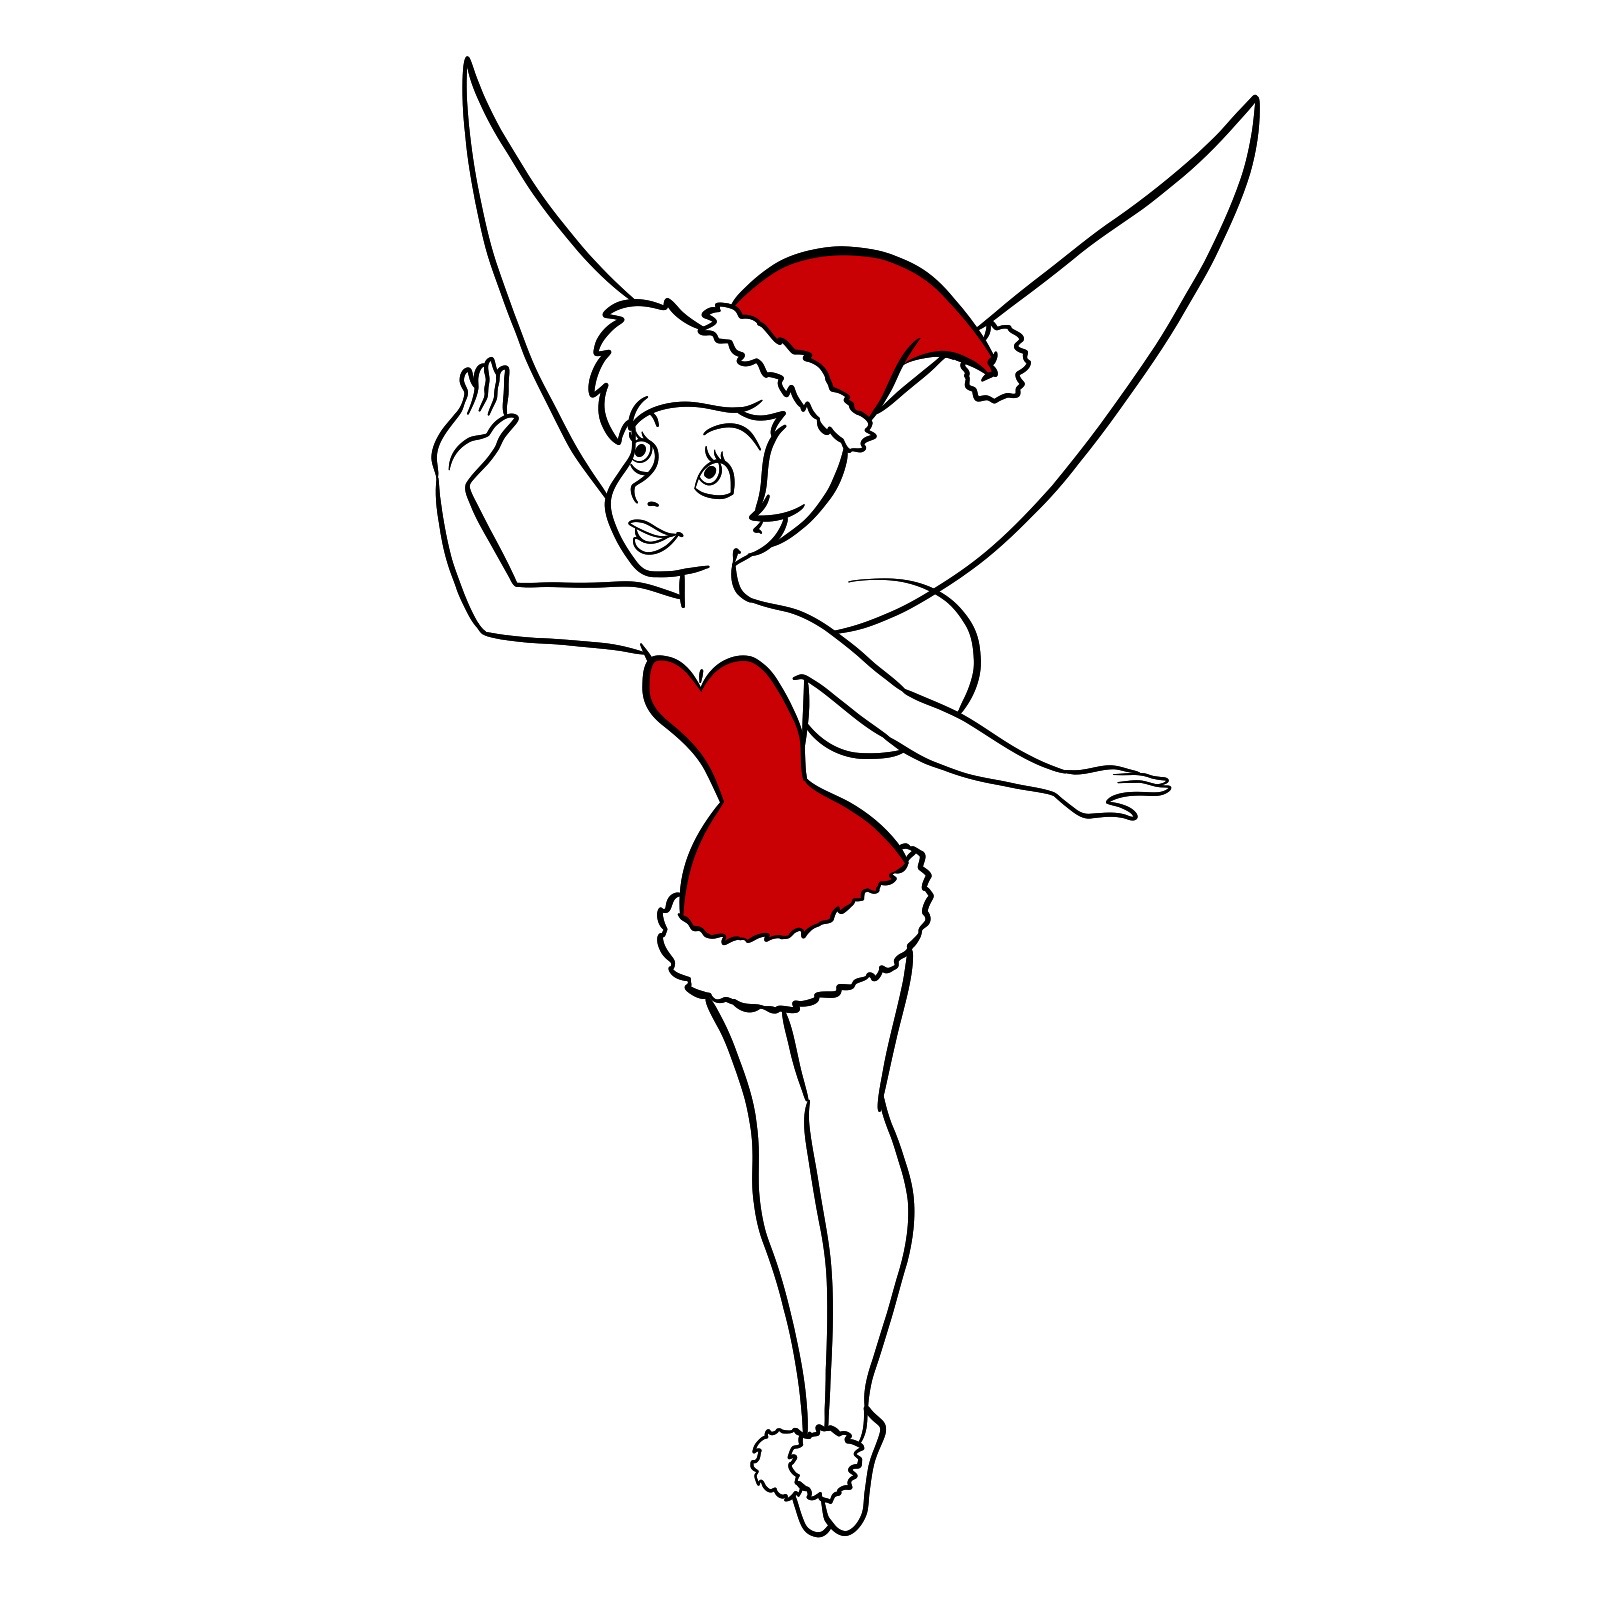 How to draw Tinker Bell in a Christmas costume - step 29